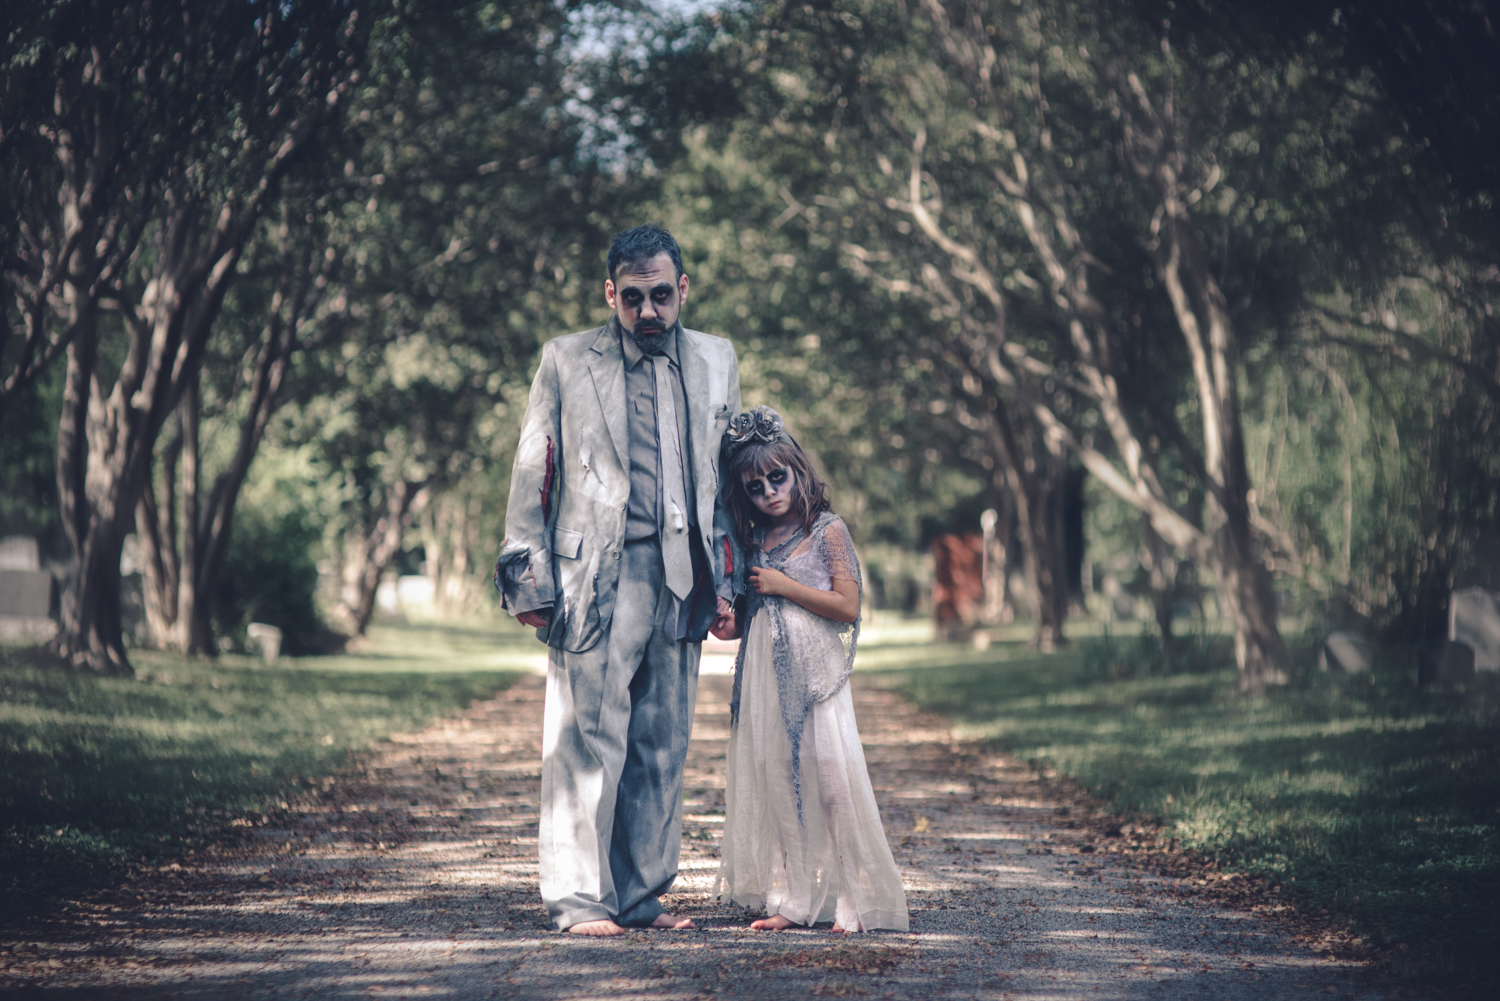 PHOTO: The Peveto family, of Dallas, holds annual eerie Halloween daddy-daughter photo shoots.